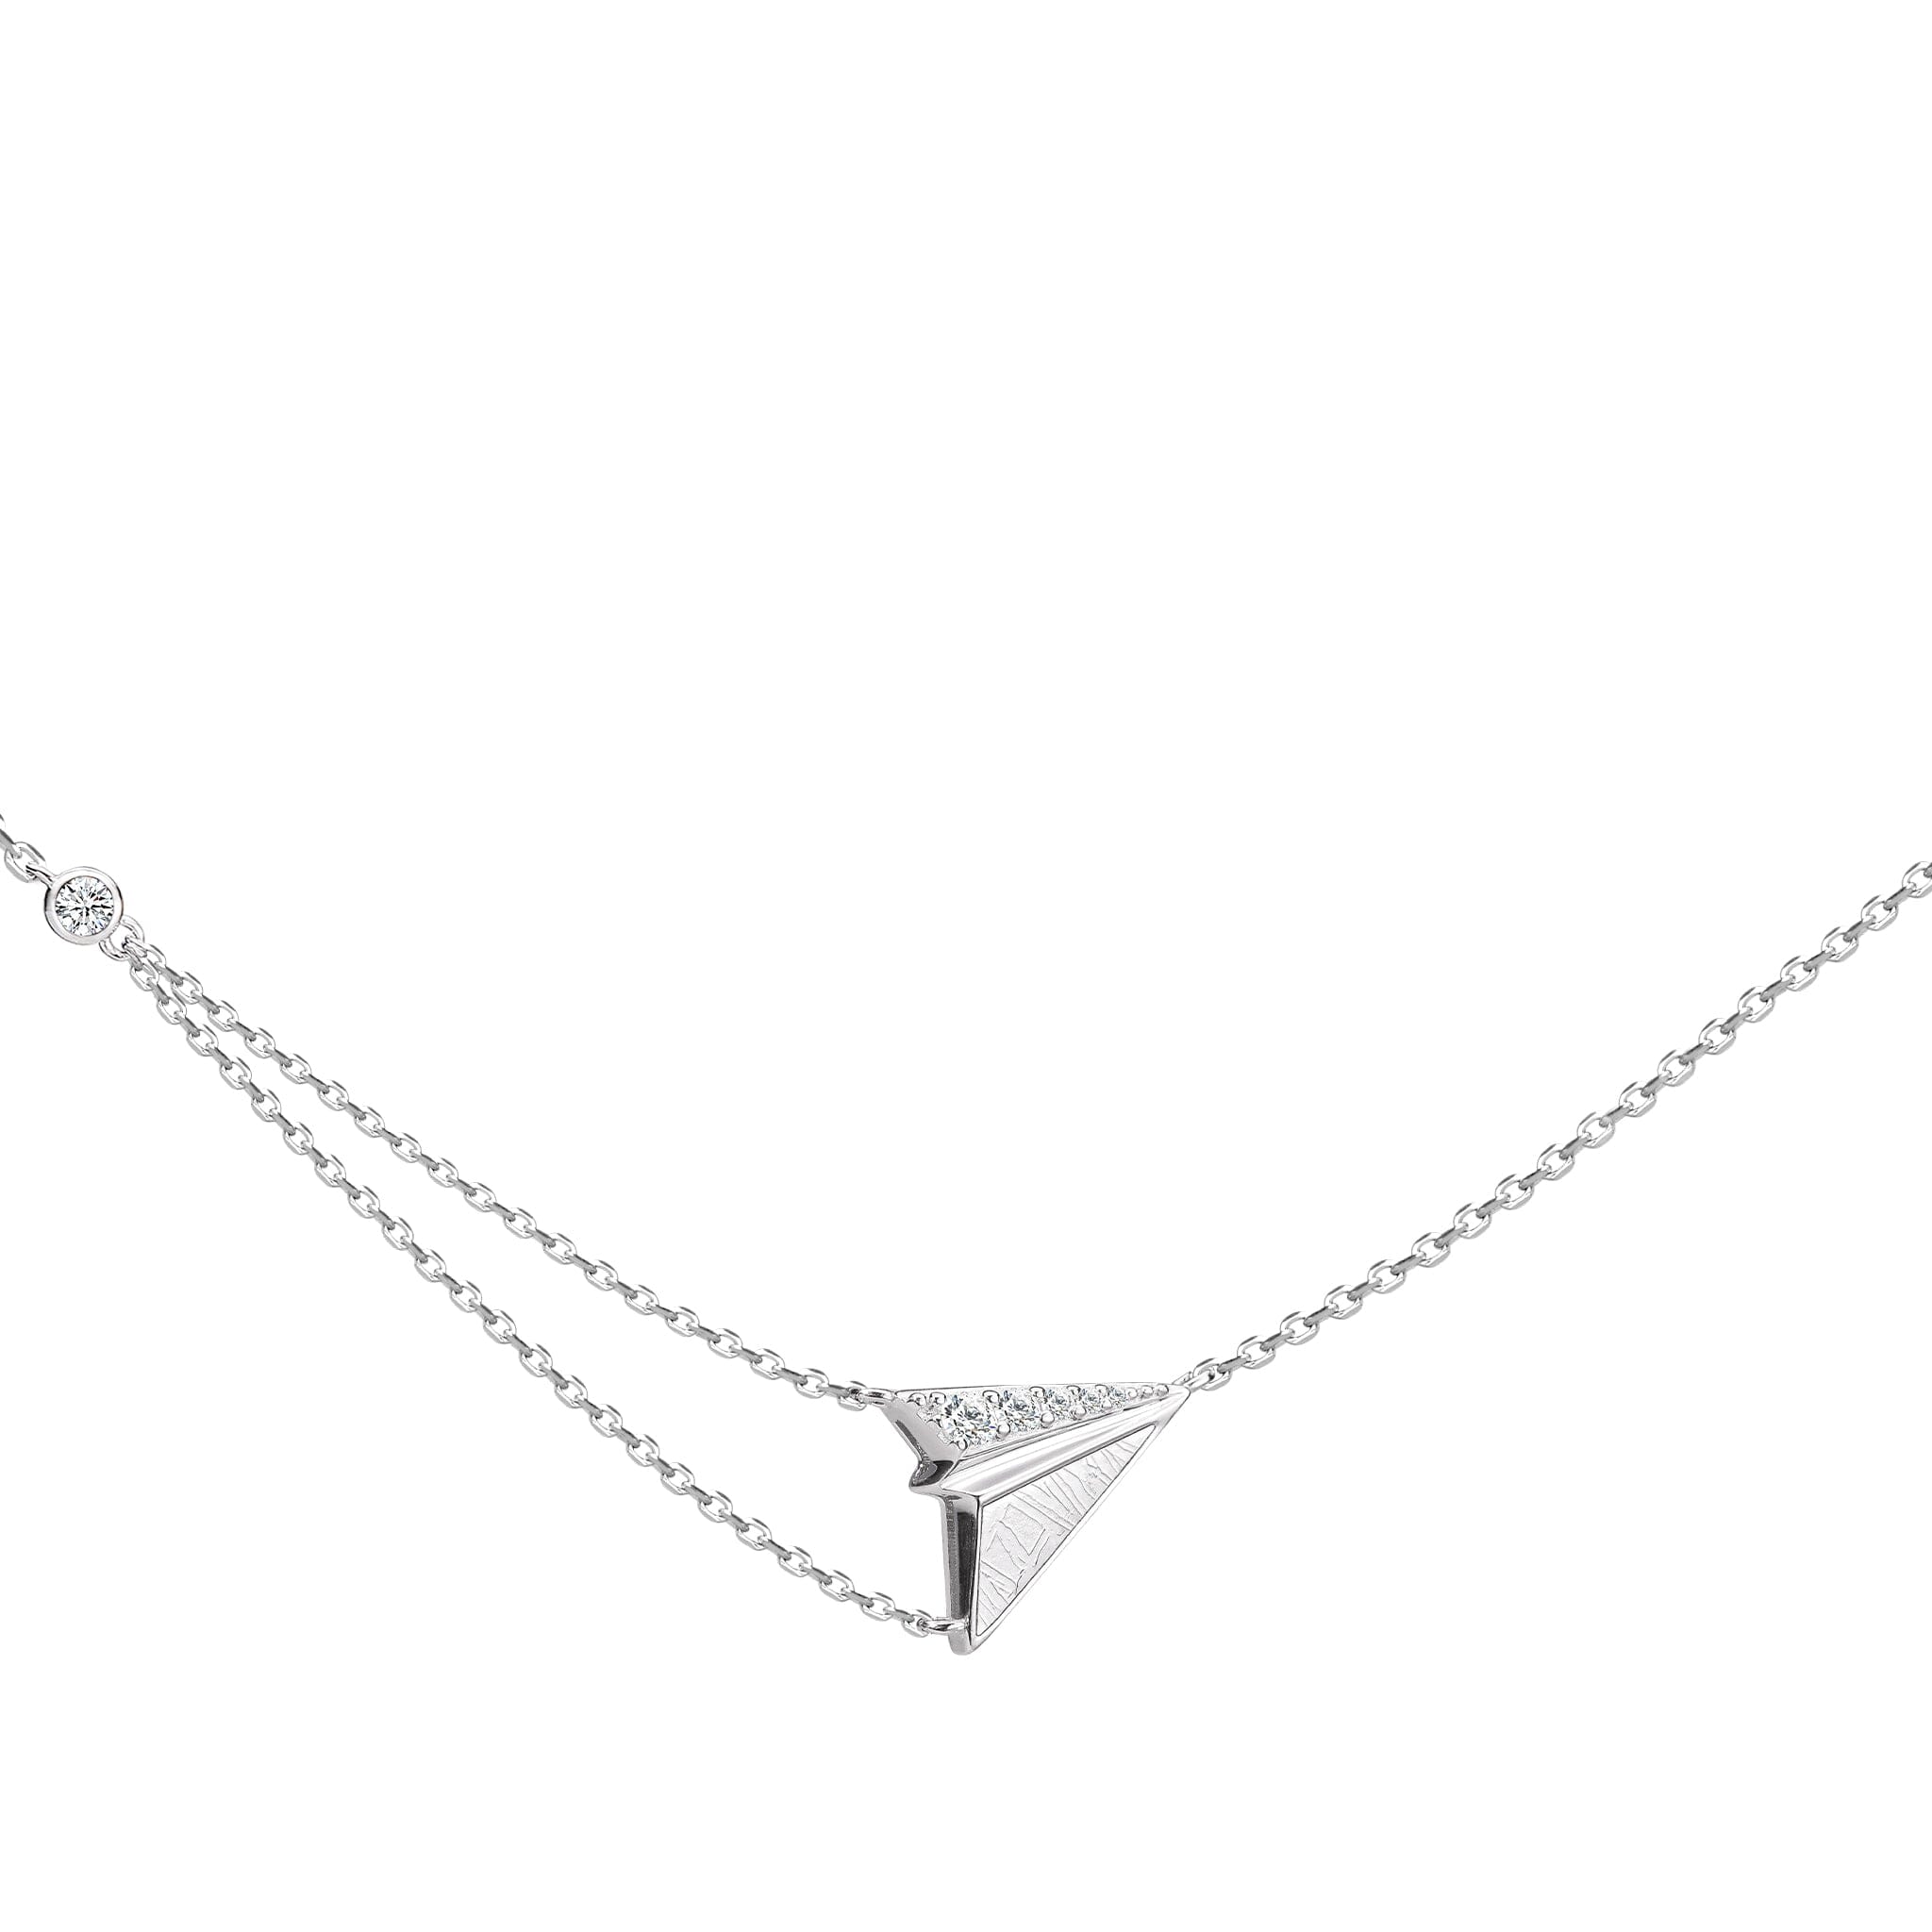 Women's Paper Airplane Necklace with Meteorite Necklaces WAA FASHION GROUP Silver Adjustable 